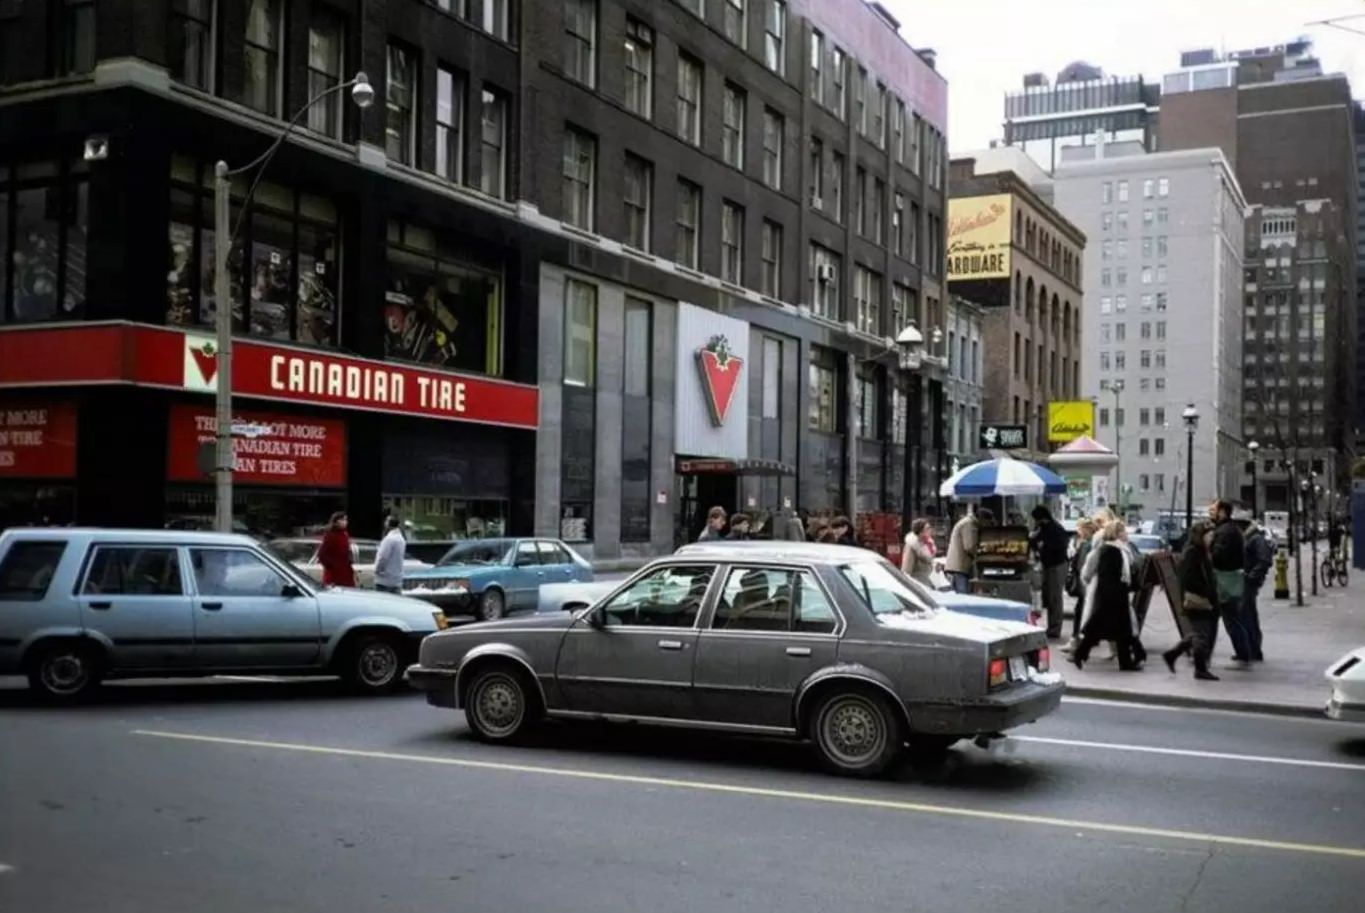 Yonge and Temperance streets, 1980s